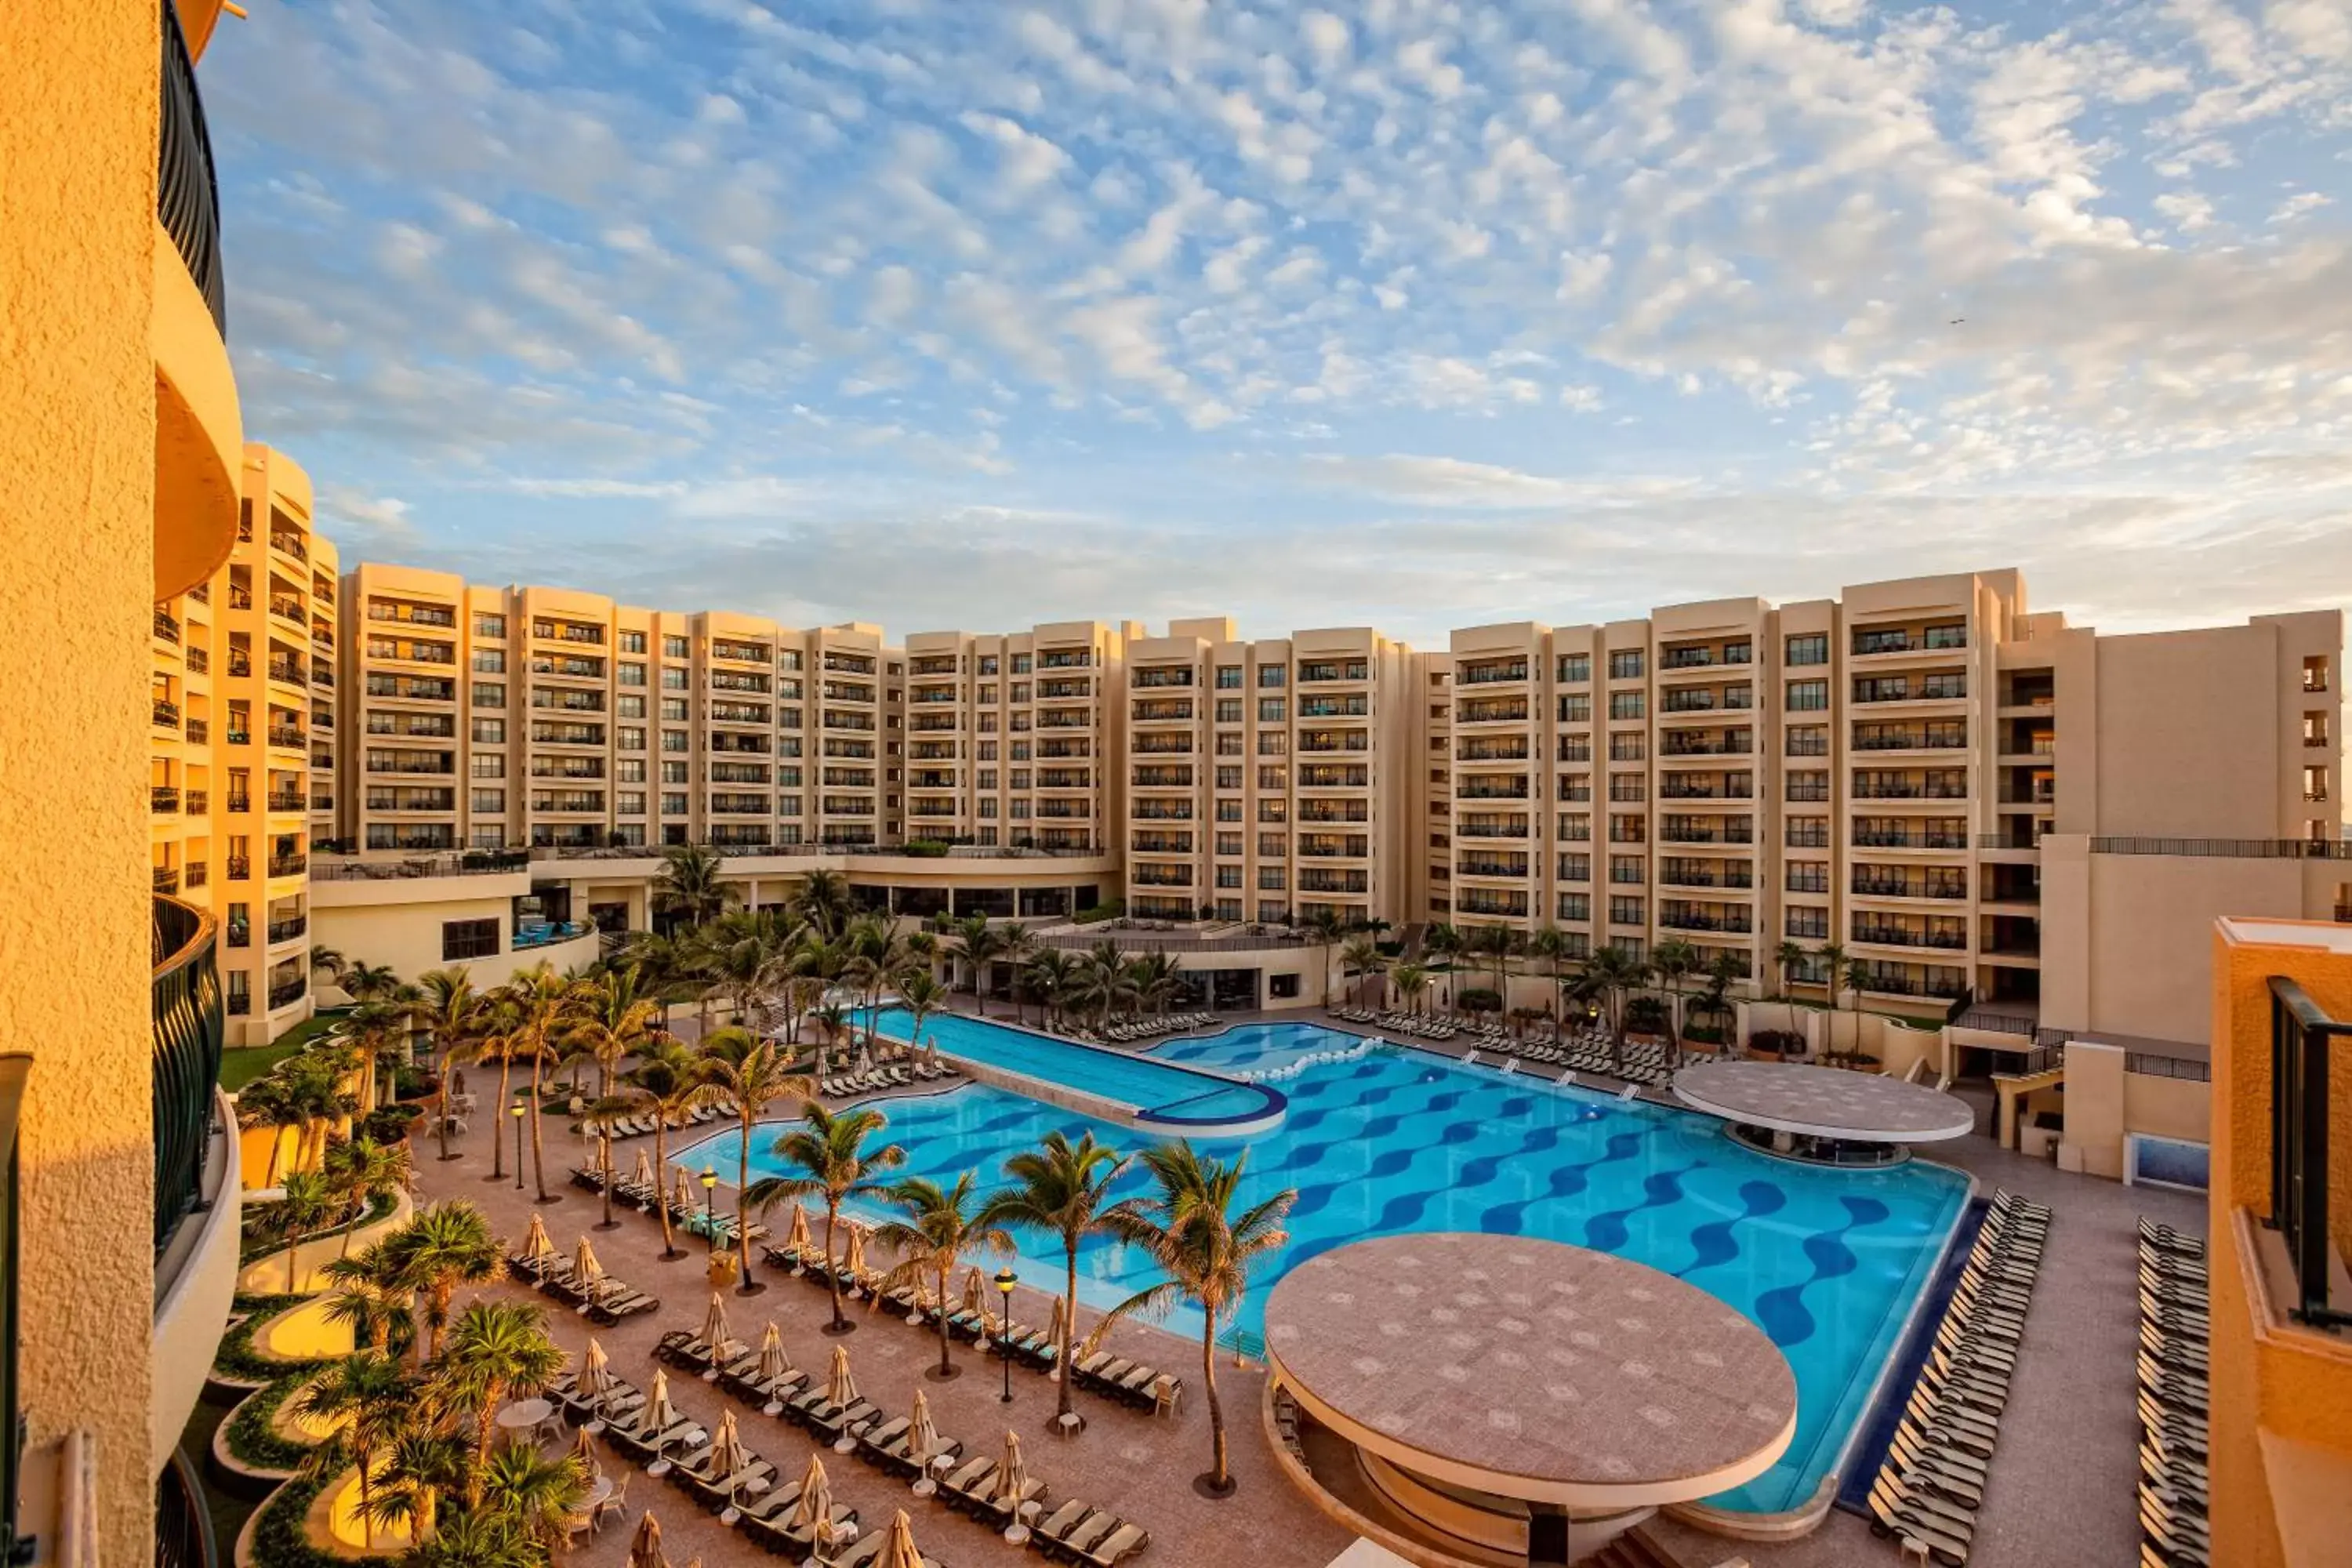 Property building, Pool View in The Royal Sands Resort & Spa